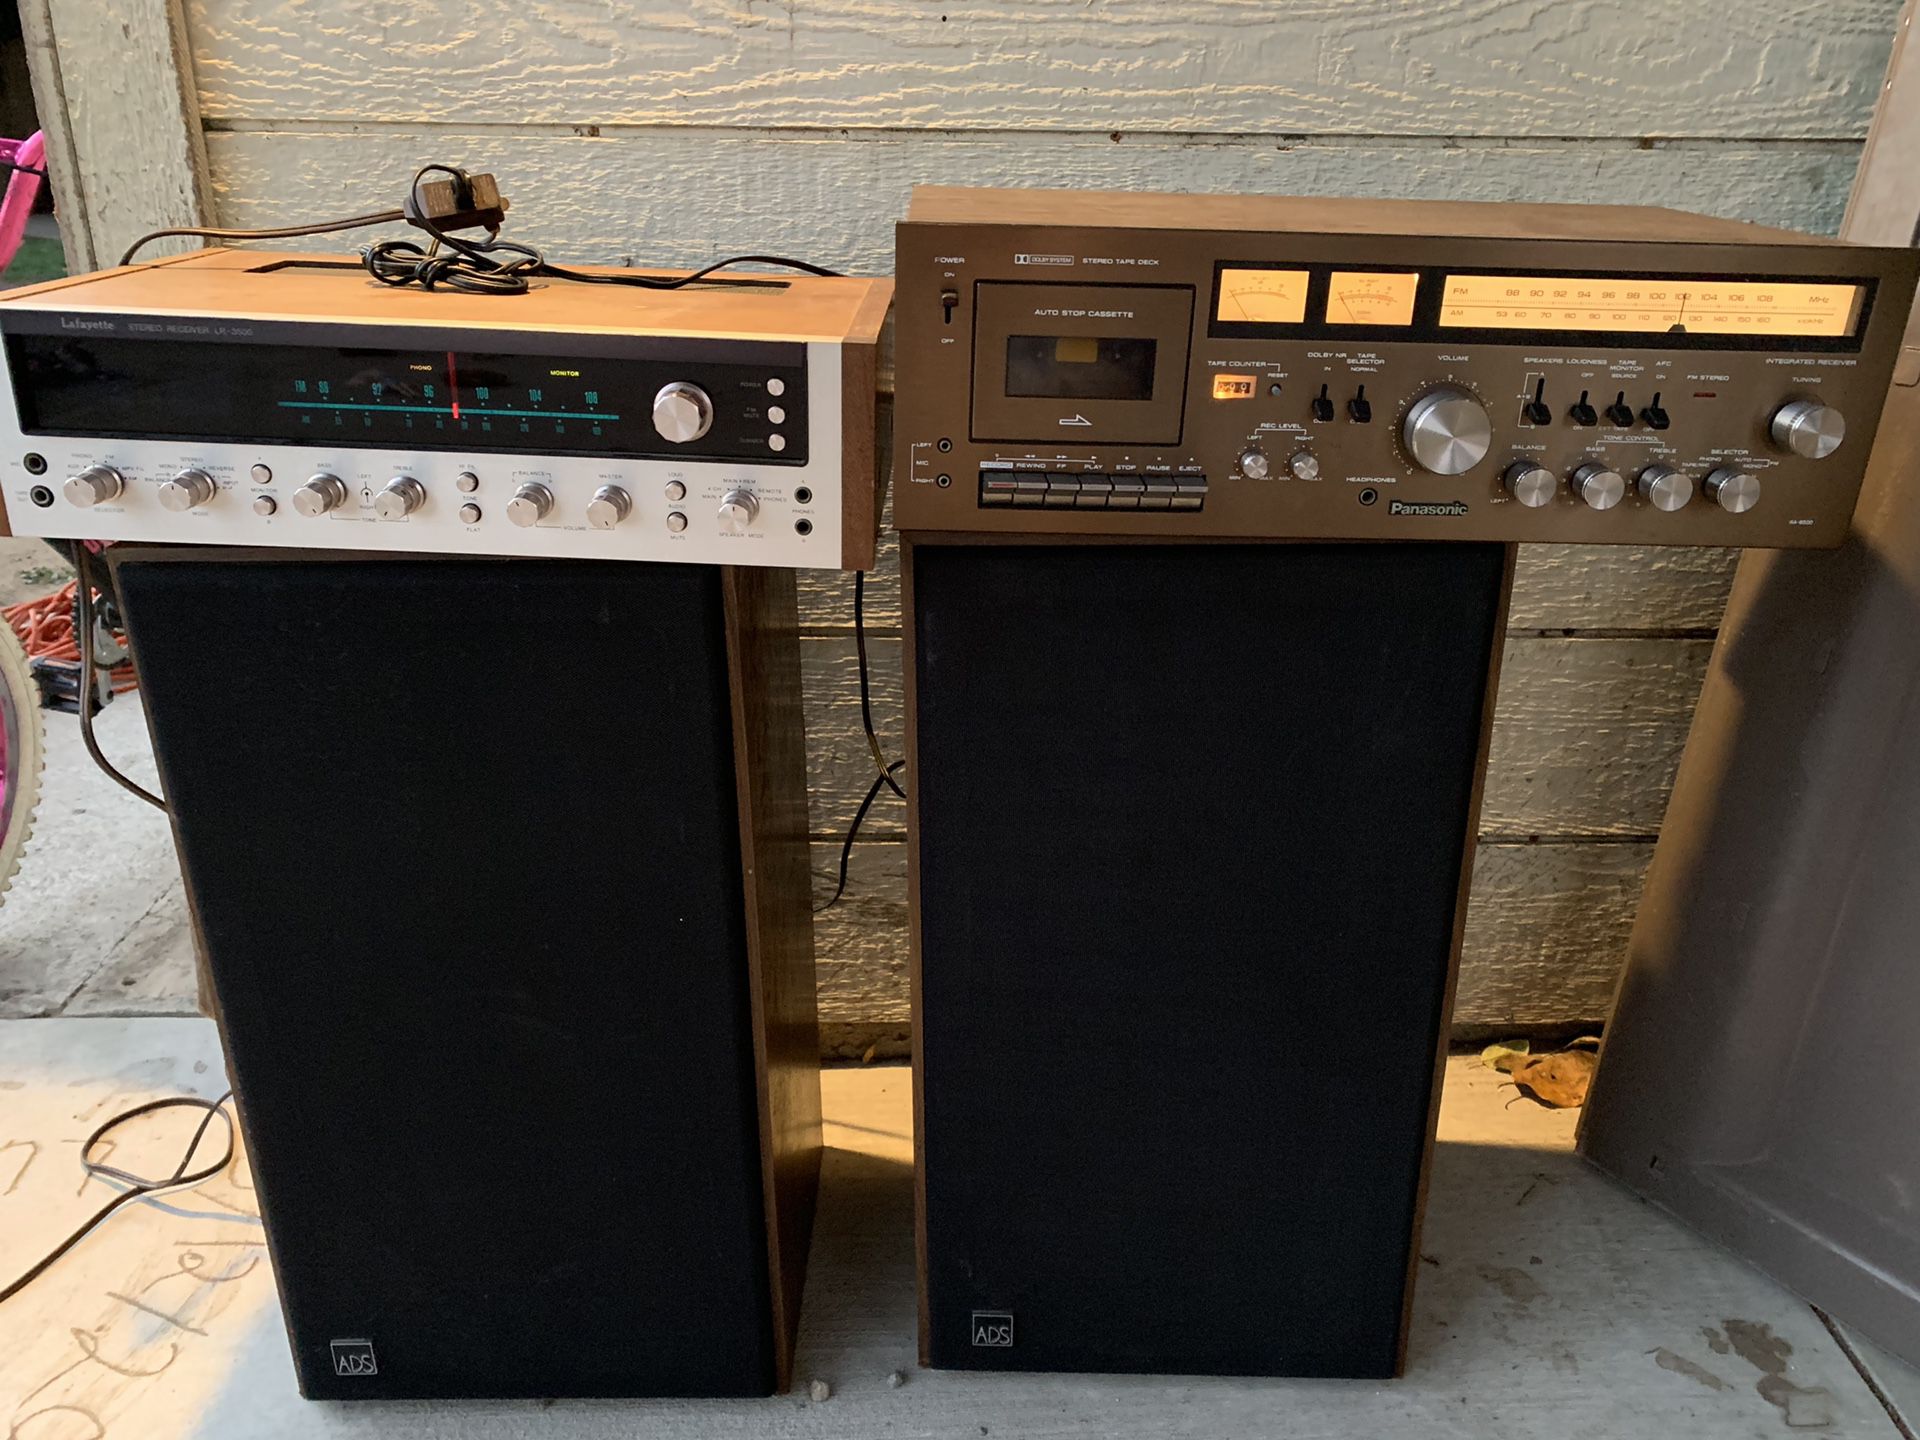 2 vintage speakers one receiver +stereo tape deck everything works perfect and good condition all set $200